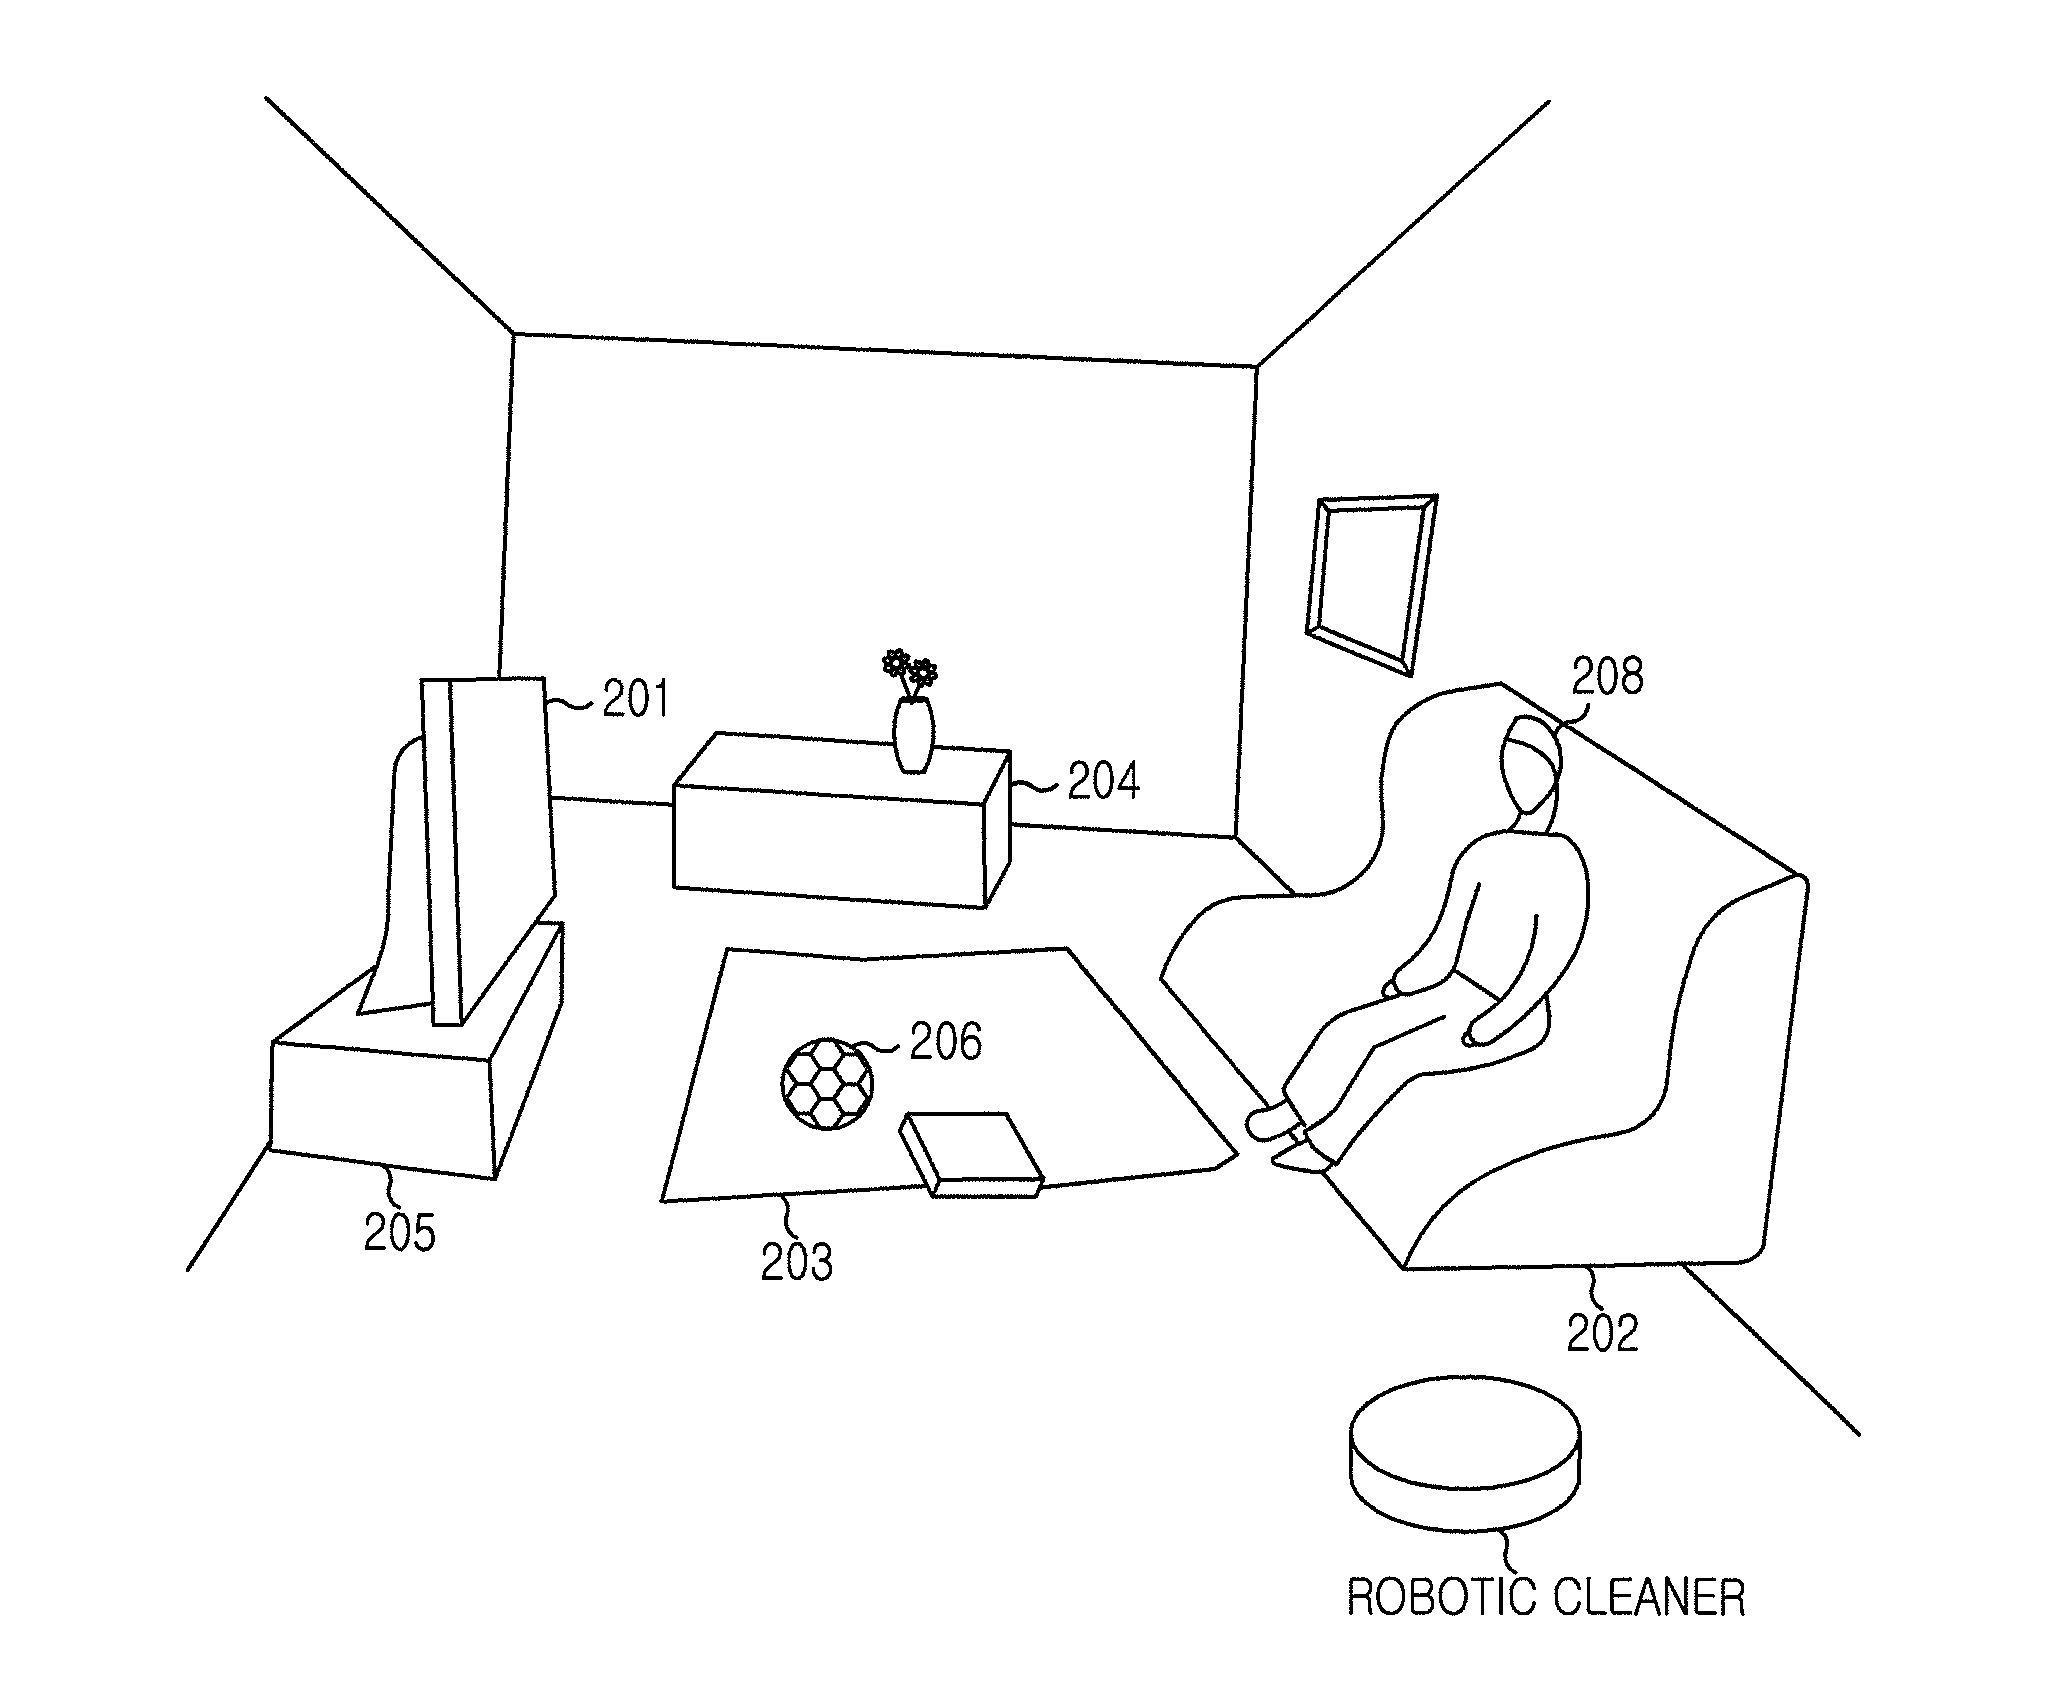 Apparatus and method for controlling cleaning in robotic cleaner